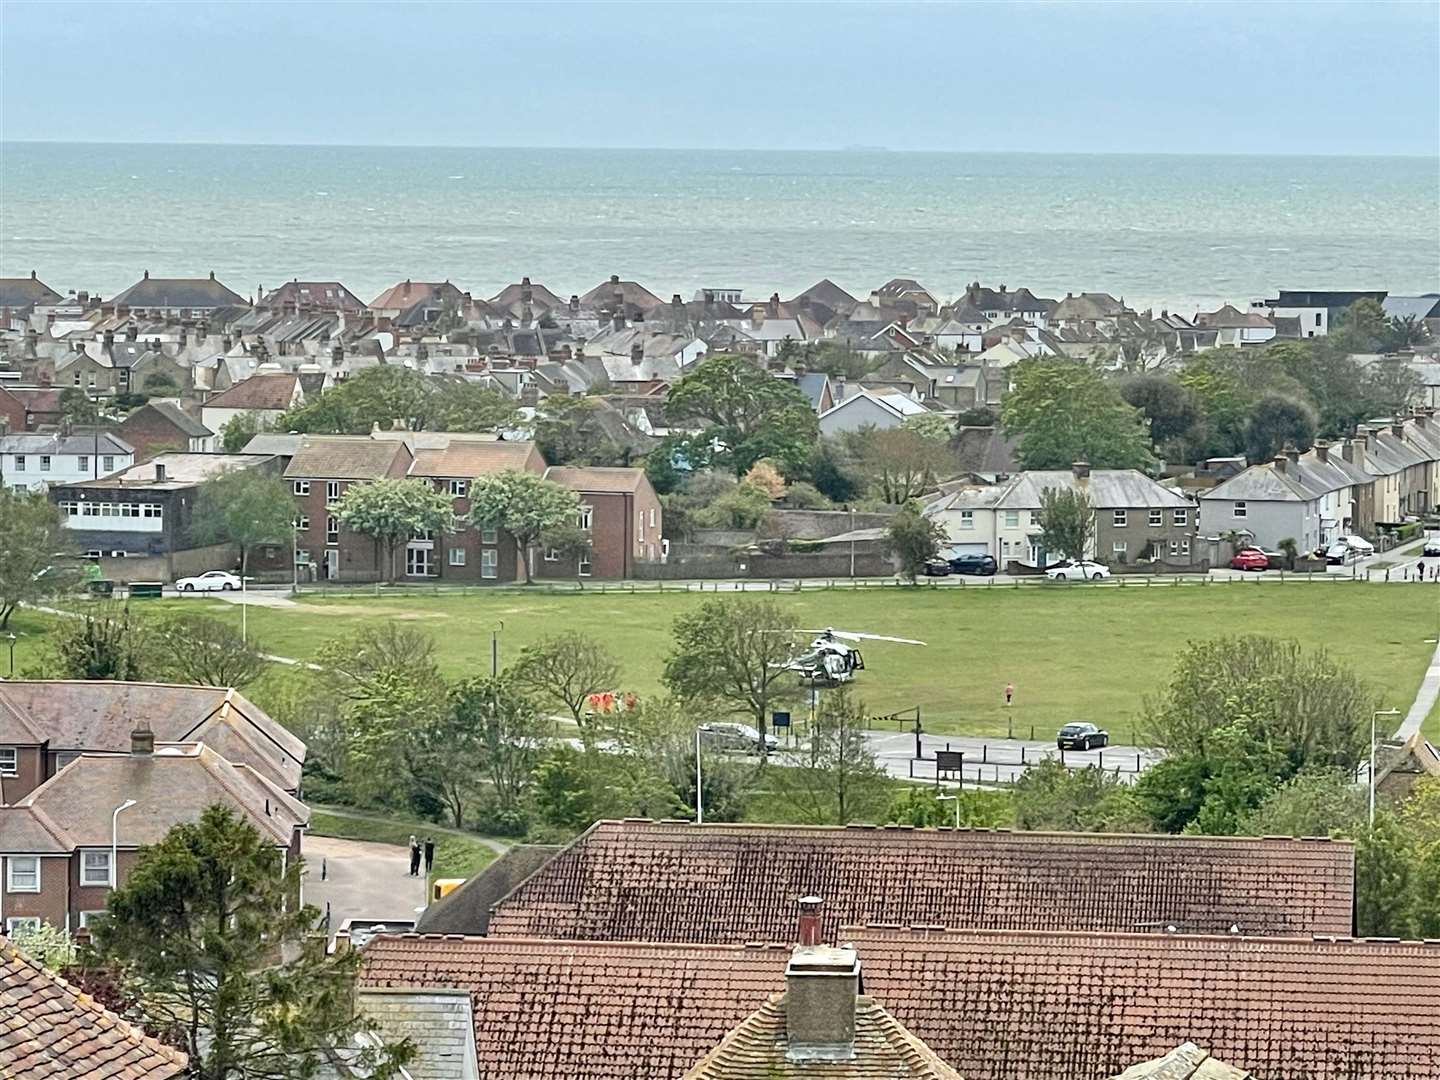 An air ambulance landed on Hythe Green this afternoon. Picture: © A Tanton / Hythe Residents Group